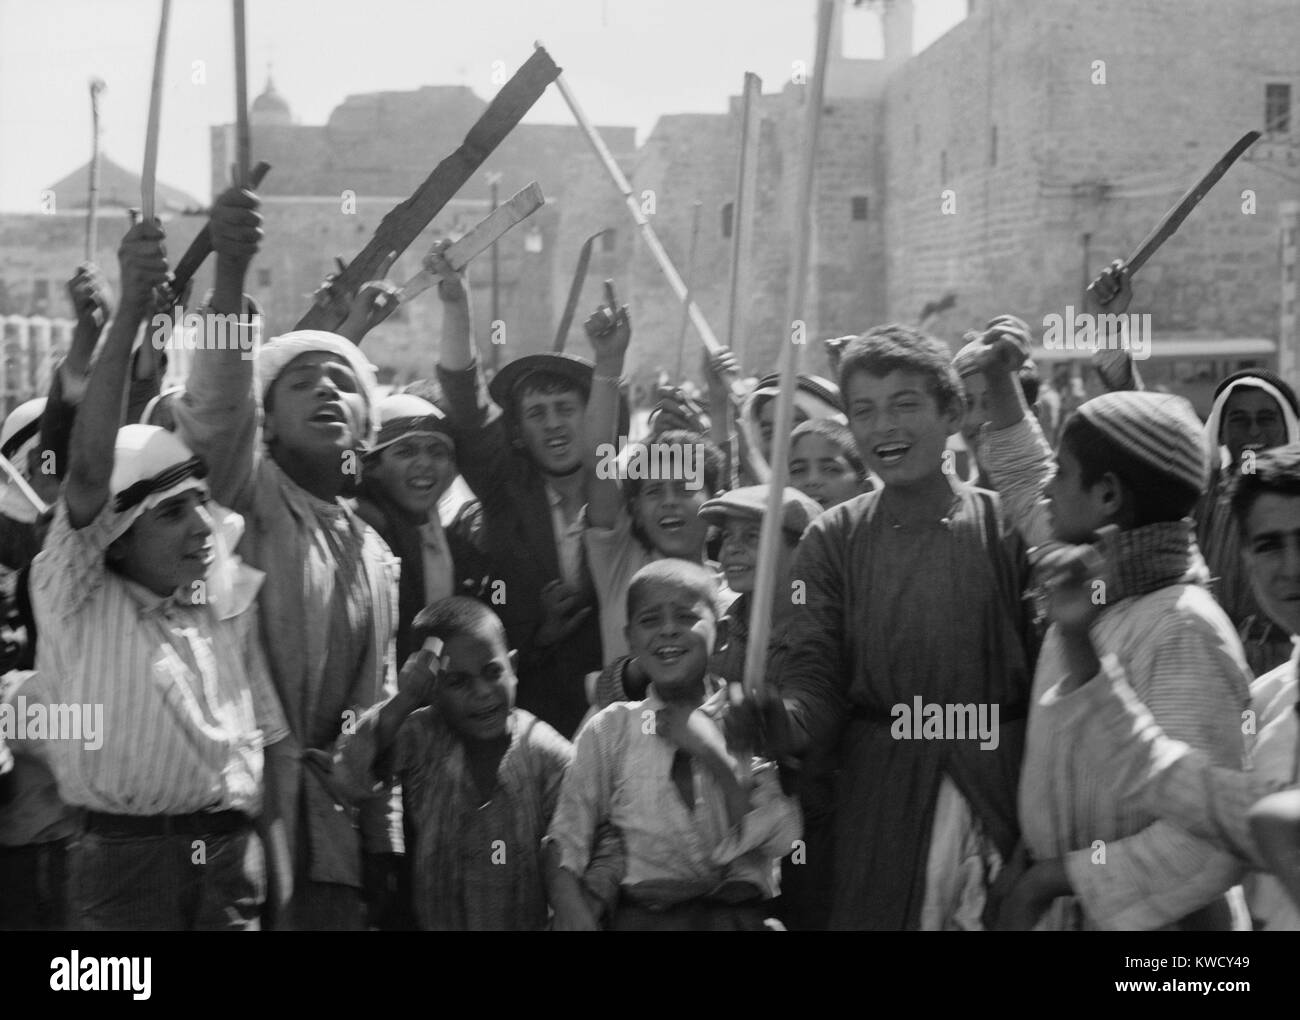 Arab youths with sticks and clubs cheering the burning of the police barracks and post office. Bethlehem, Palestine, Oct. 8, 1938 (BSLOC 2017 1 207) Stock Photo